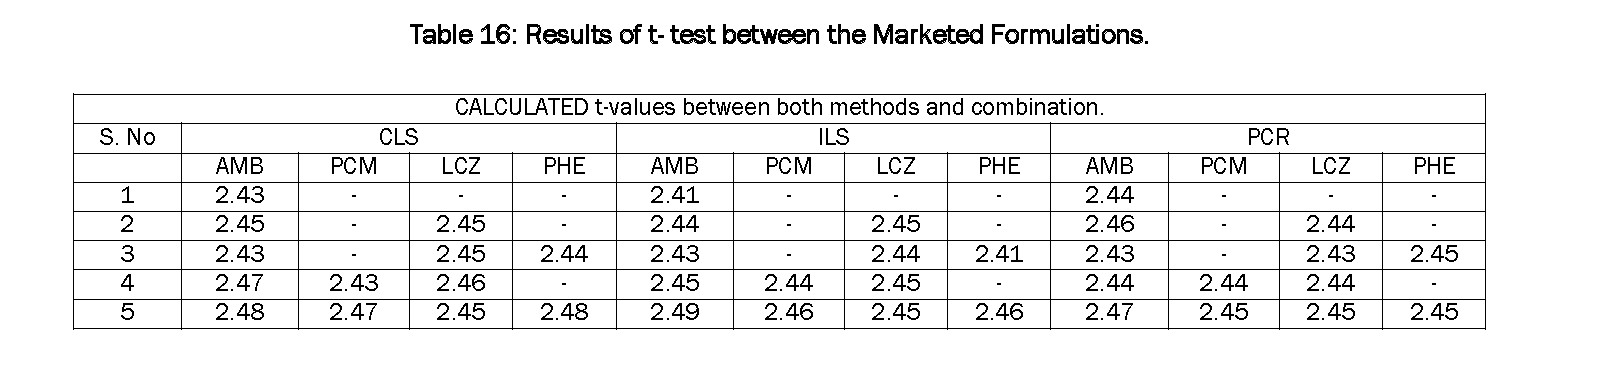 Pharmaceutical-Analysis-Results-t-test-between-Marketed-Formulations